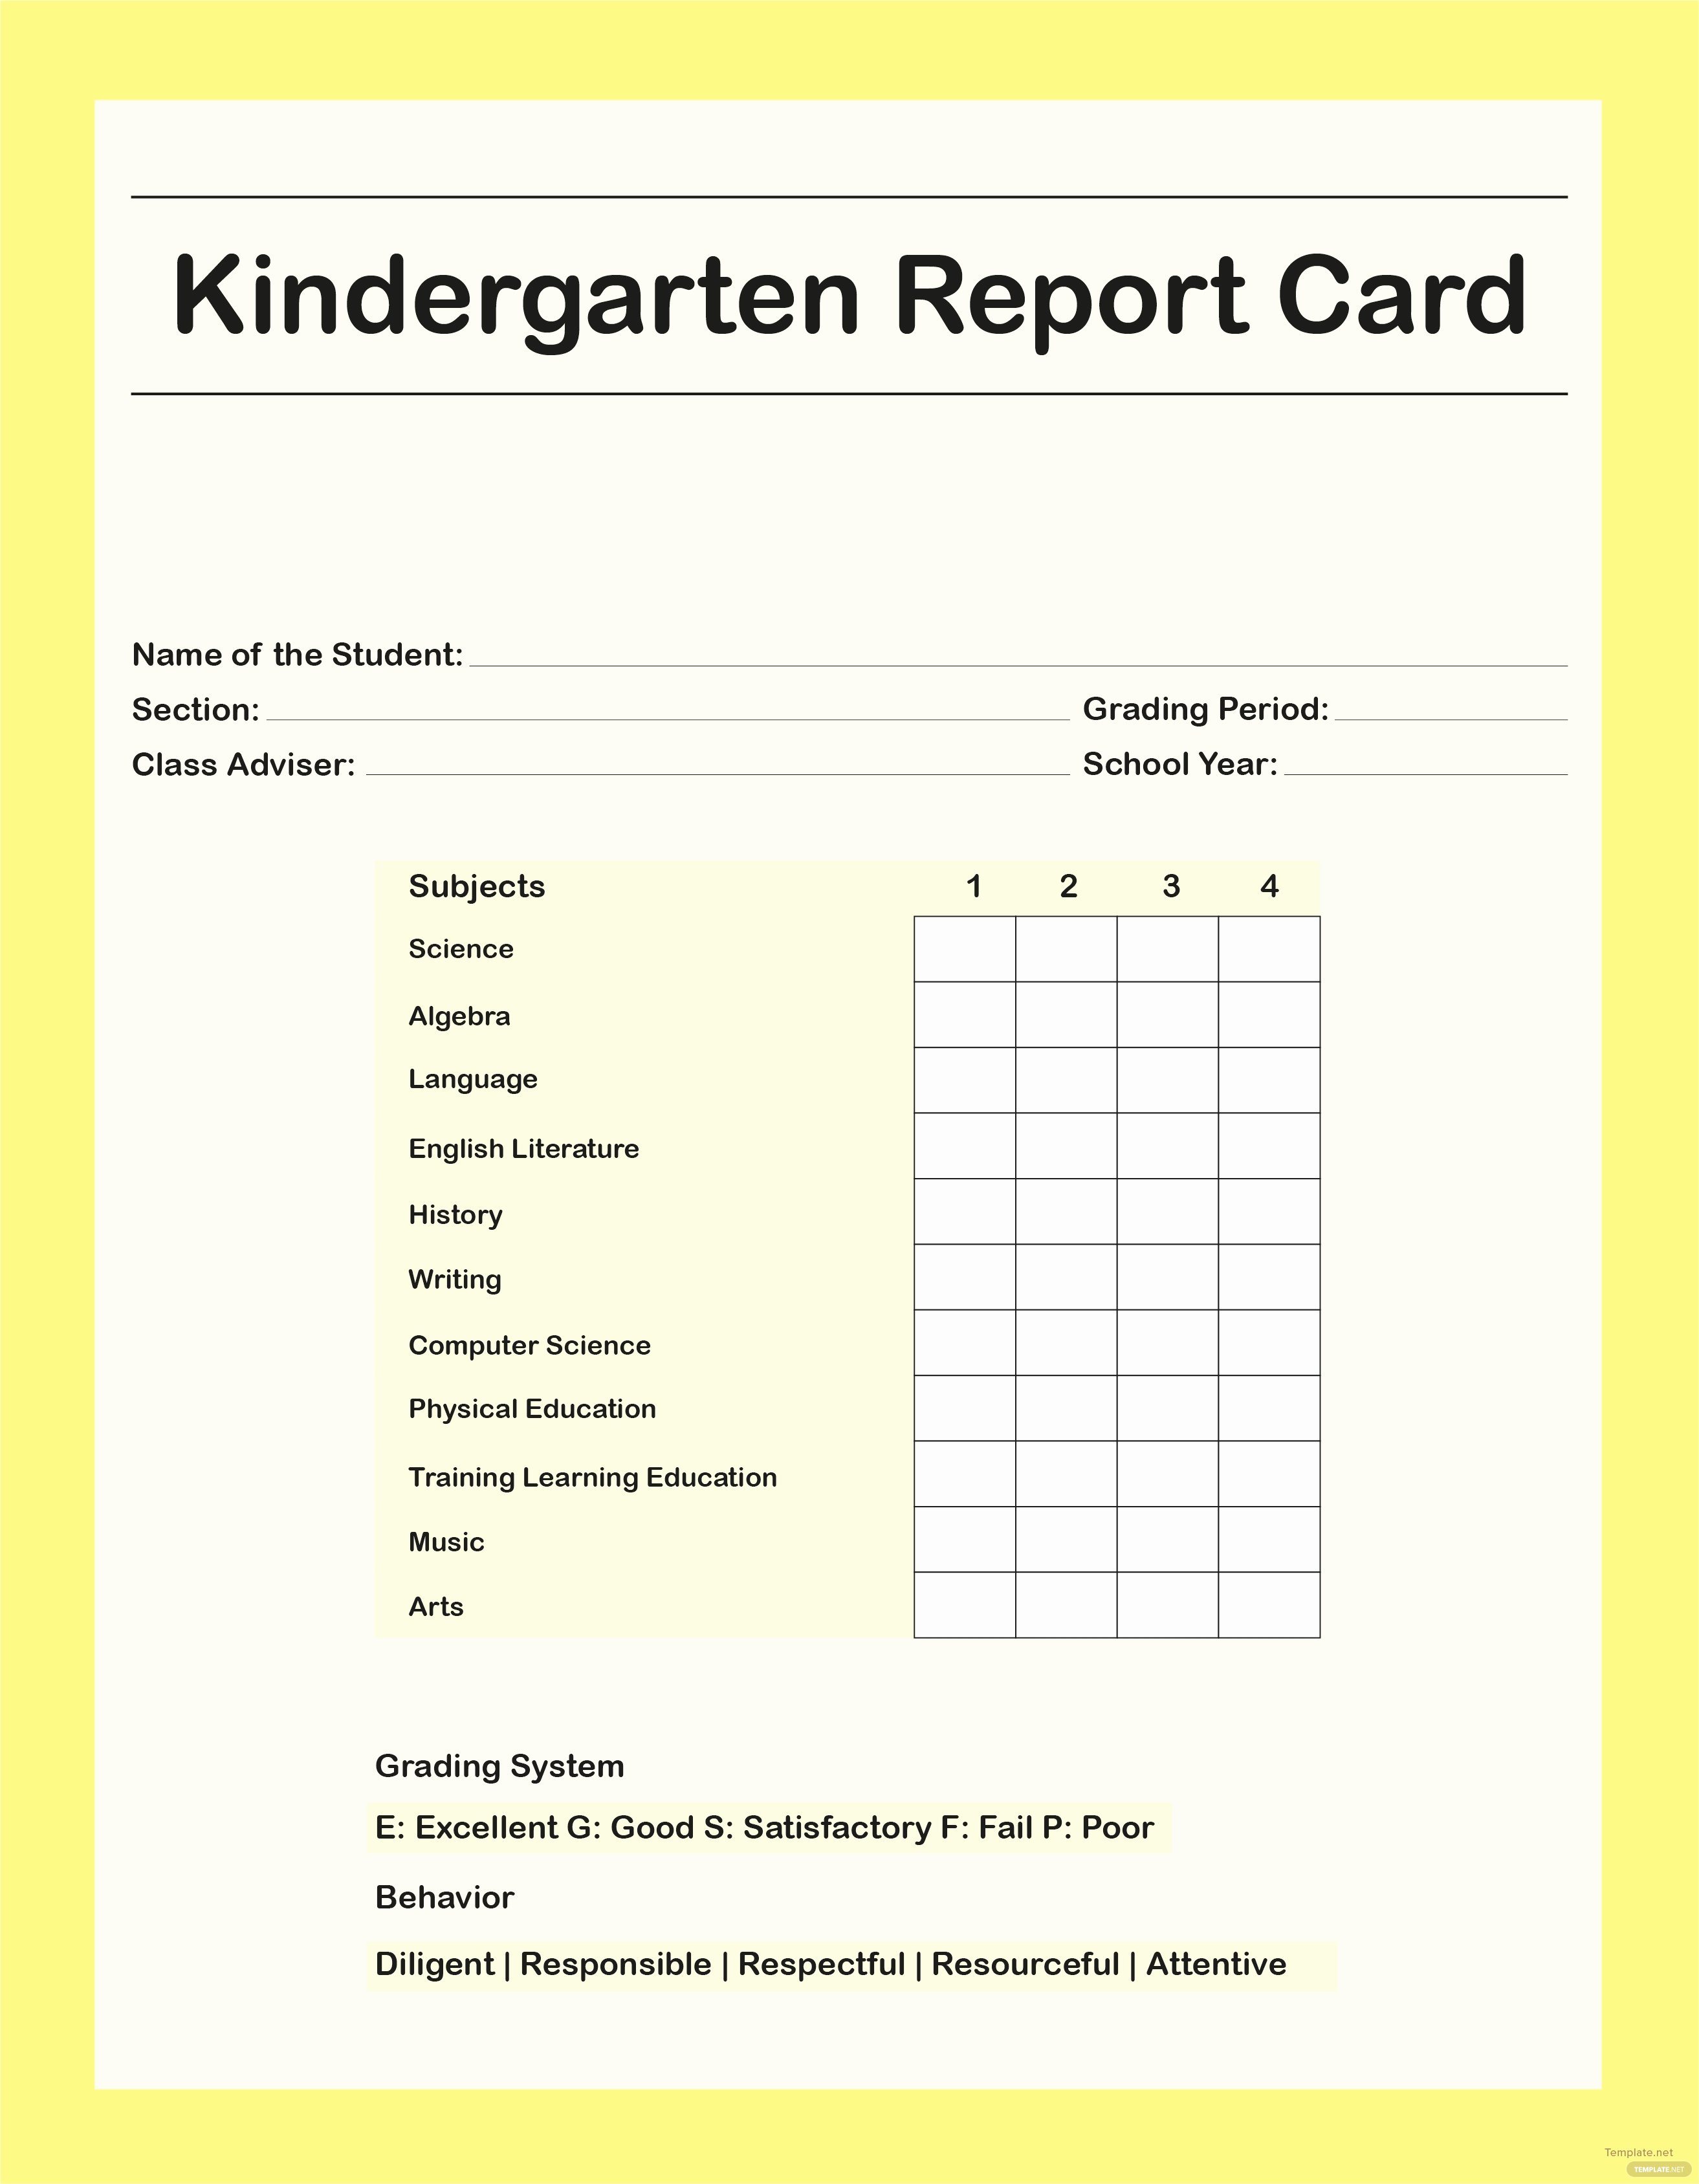 Kindergarten Report Card Template Awesome Free Kindergarten Report Card Template In Adobe Shop